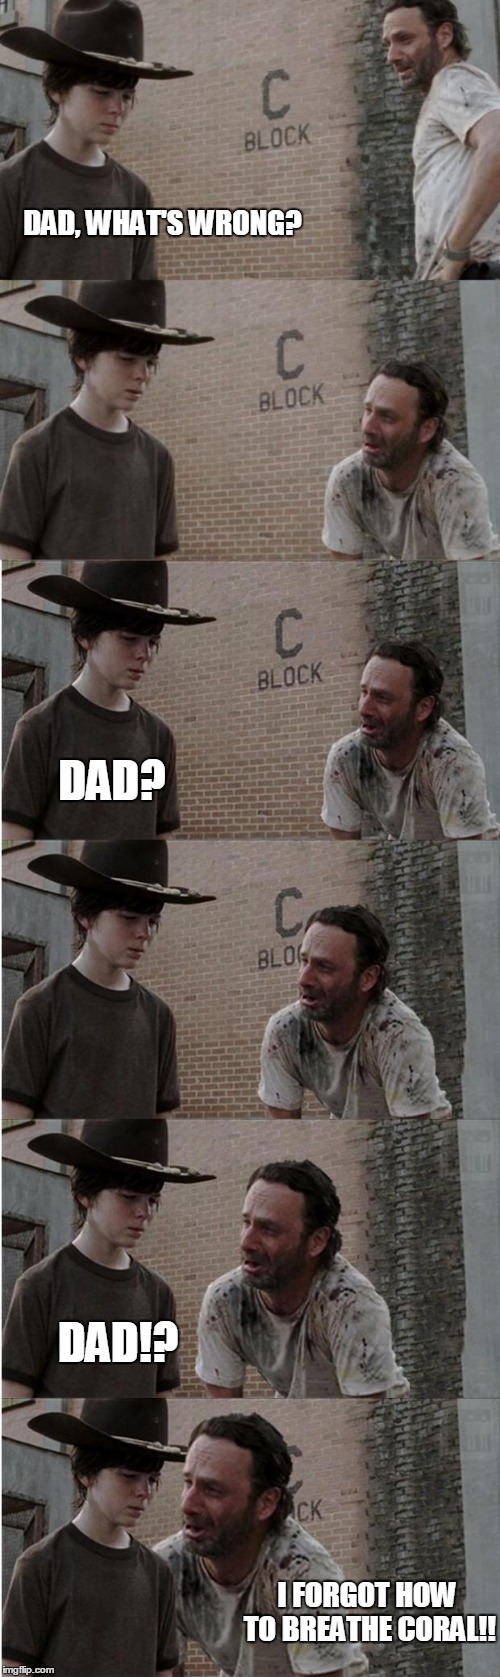 Rick and Carl Longer | DAD, WHAT'S WRONG? DAD? DAD!? I FORGOT HOW TO BREATHE CORAL!! | image tagged in memes,rick and carl longer | made w/ Imgflip meme maker